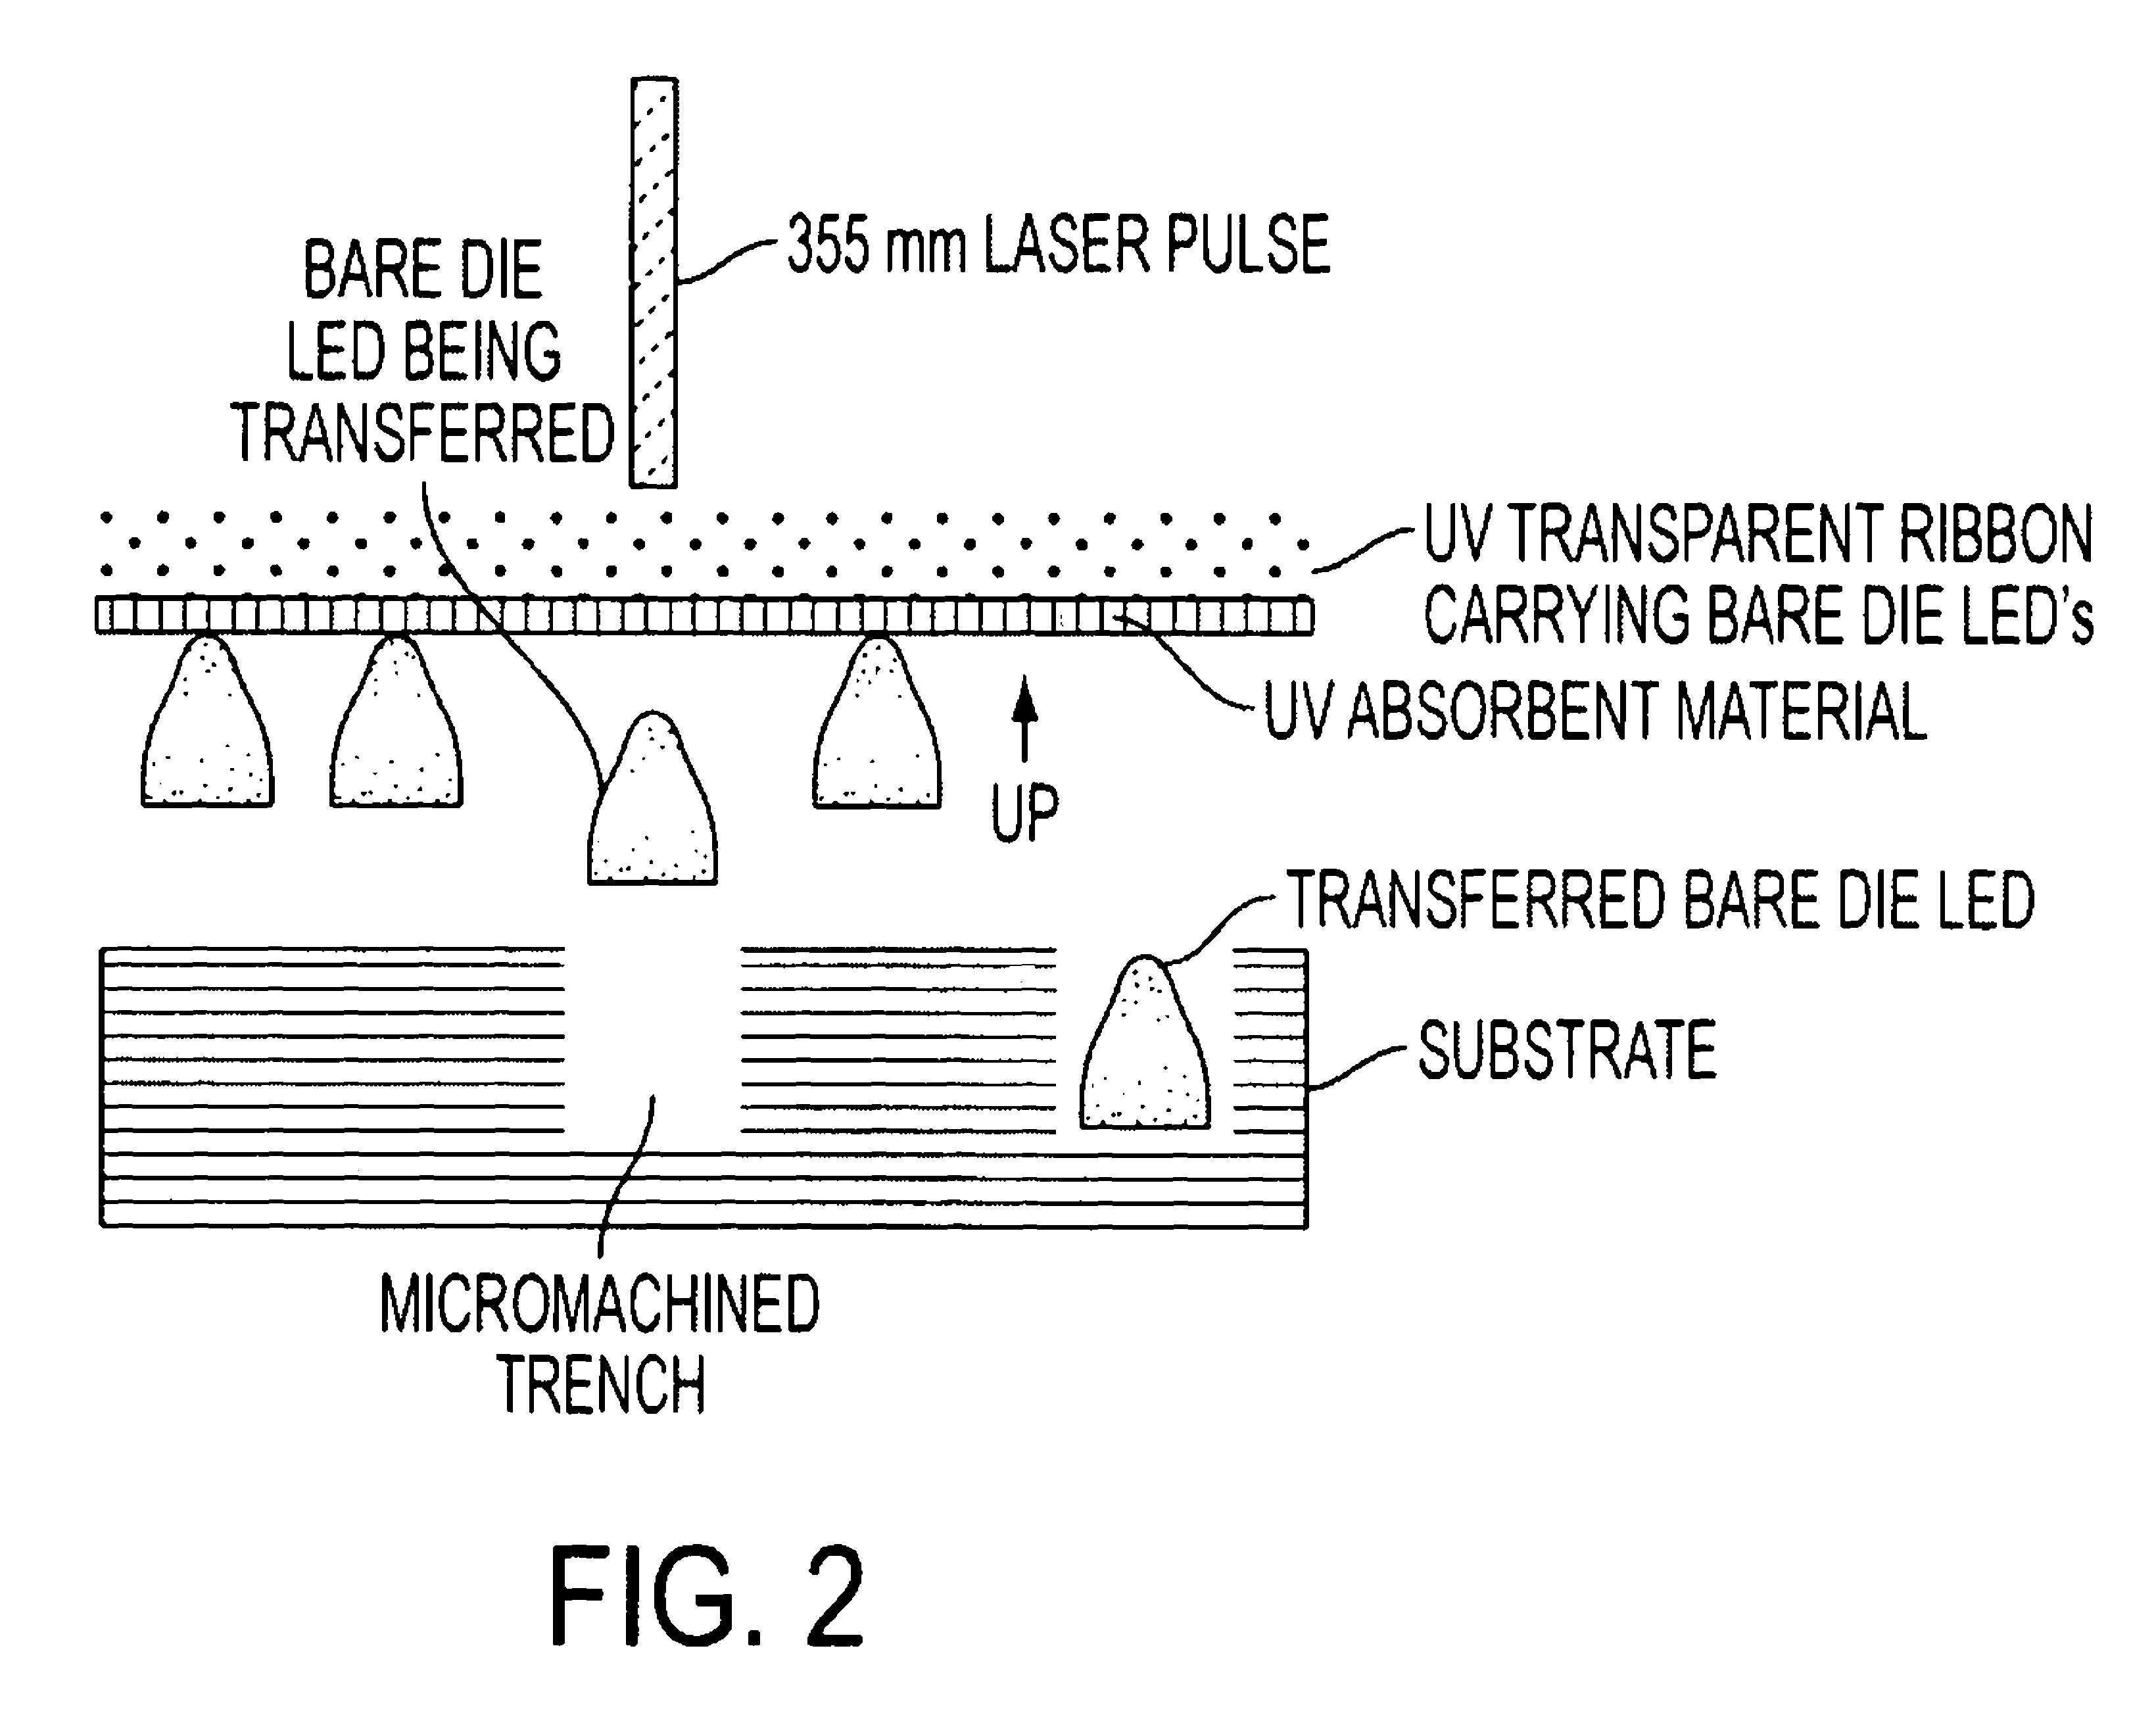 Laser-based technique for the transfer and embedding of electronic components and devices